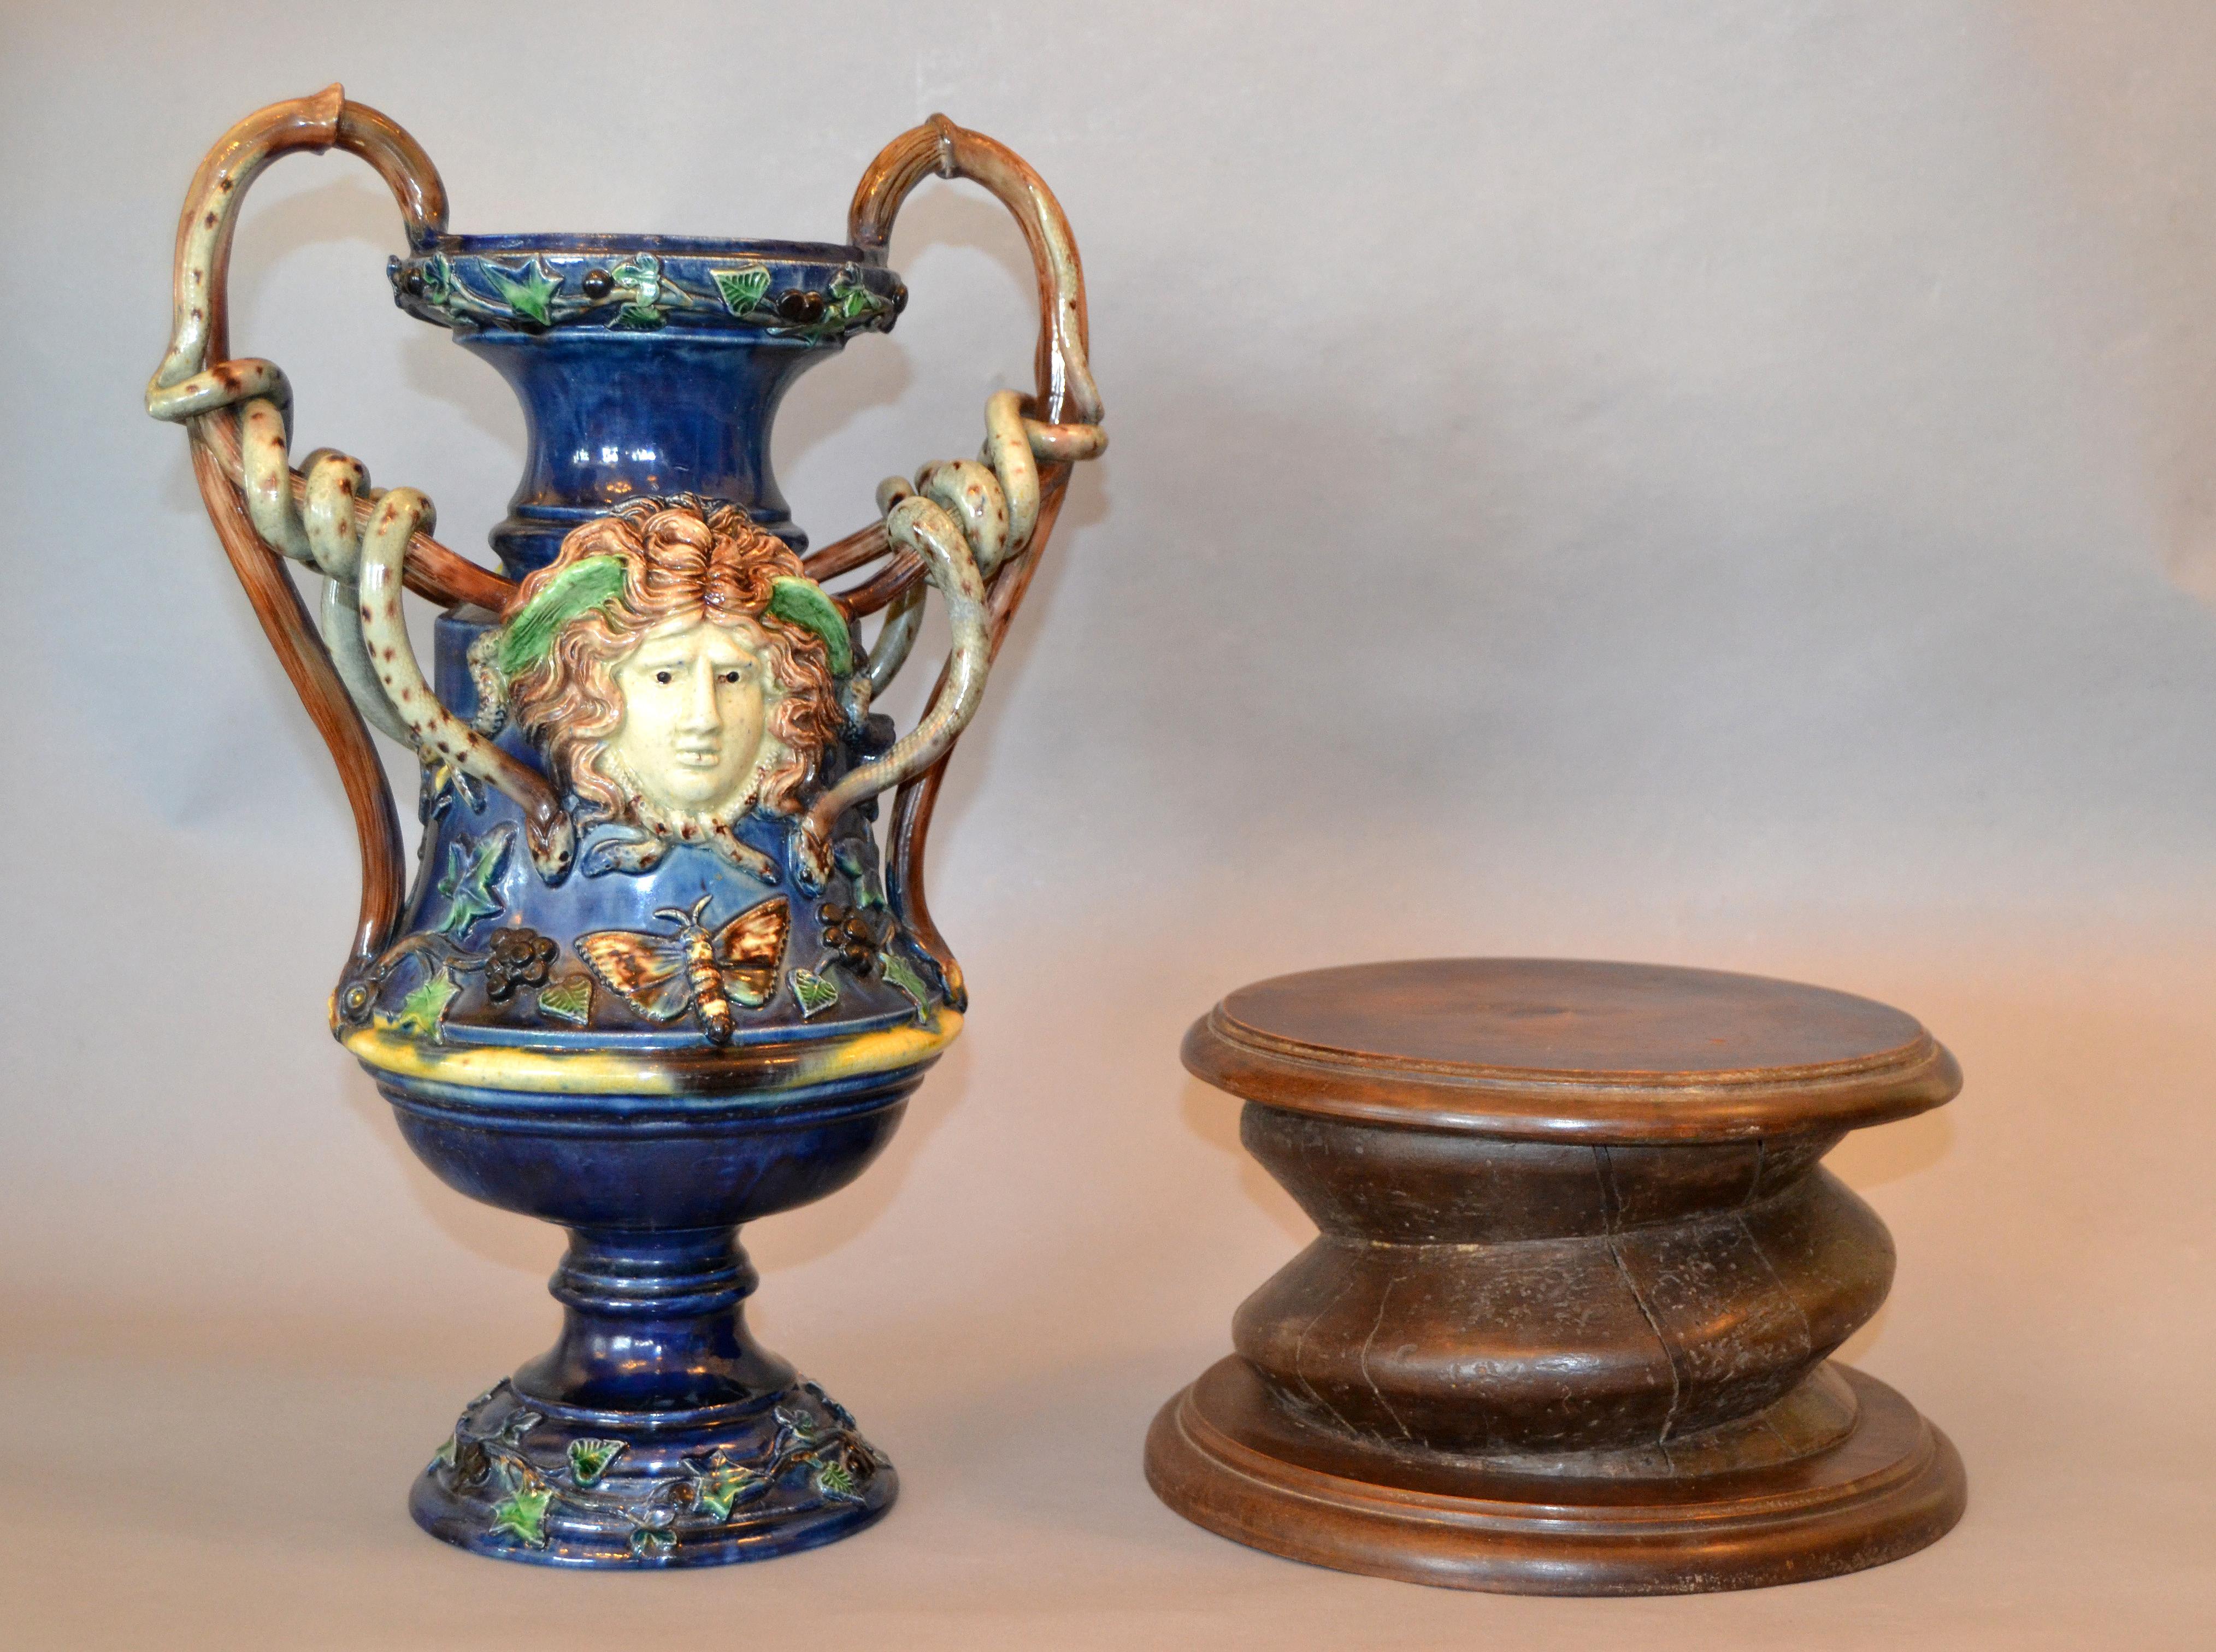 Neoclassical French 19th Century Antique Hand Painted Ceramic Vase Wine Decanter Wooden Riser For Sale